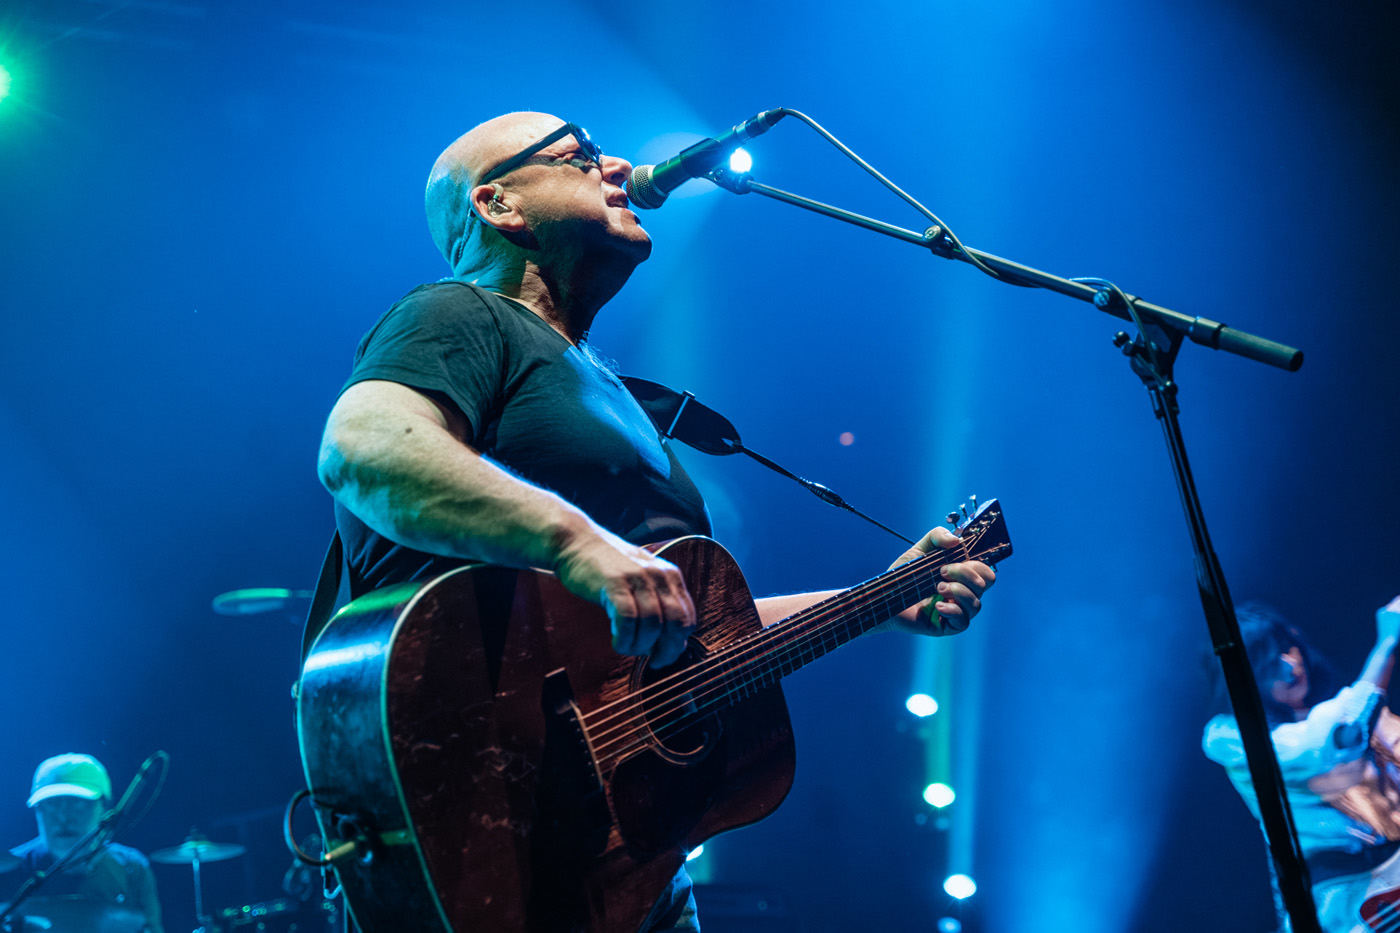 The Pixies and The Slow Readers Club at London Roundhouse